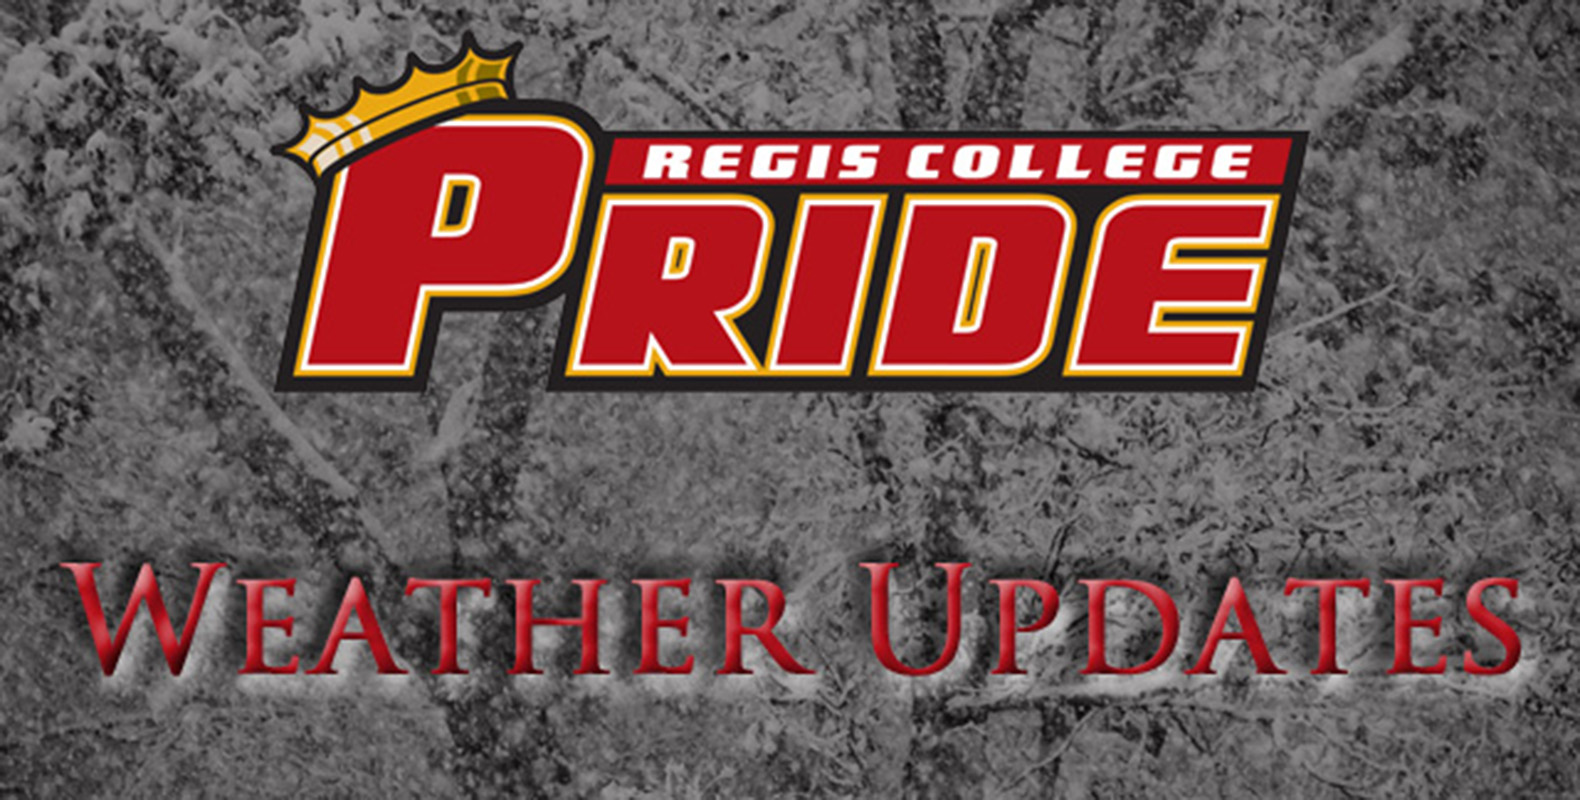 Adverse Weather Affecting Upcoming Regis Athletics Events